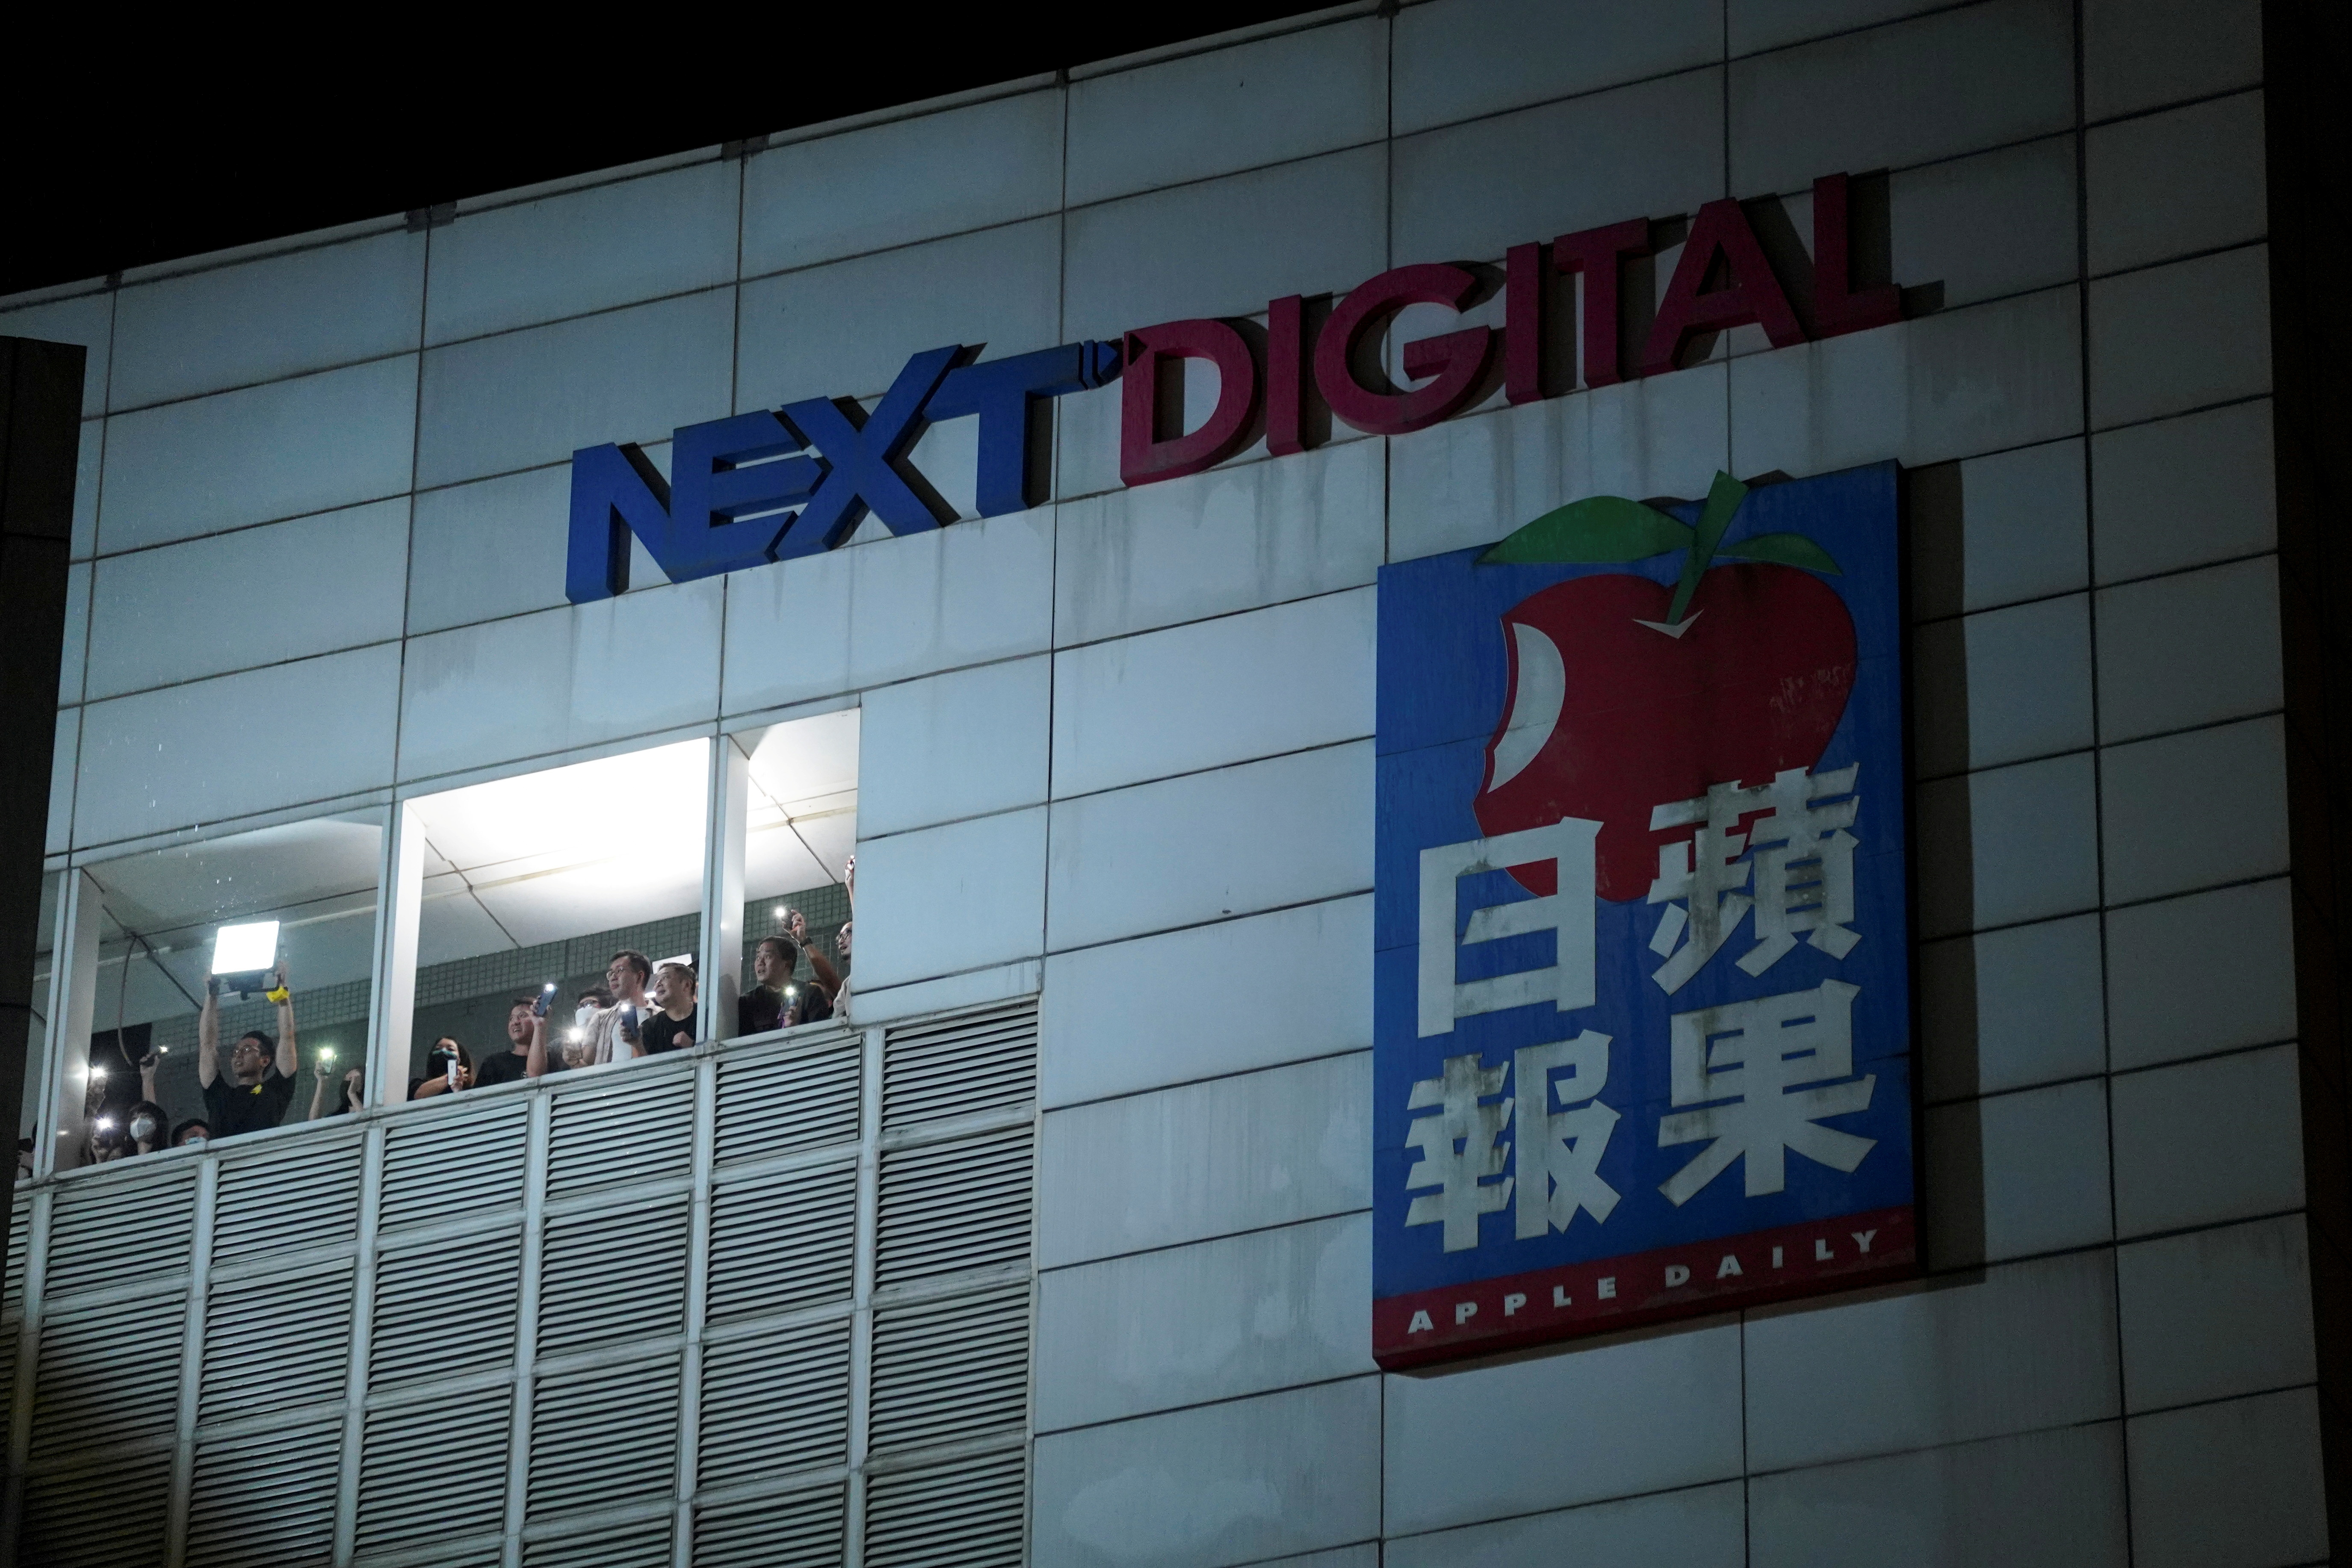 Staff light their phone flashlights at the offices of Apple Daily and its publisher Next Digital, after the announcement it will print its last edition, in Hong Kong, China June 23, 2021. REUTERS/Lam Yik